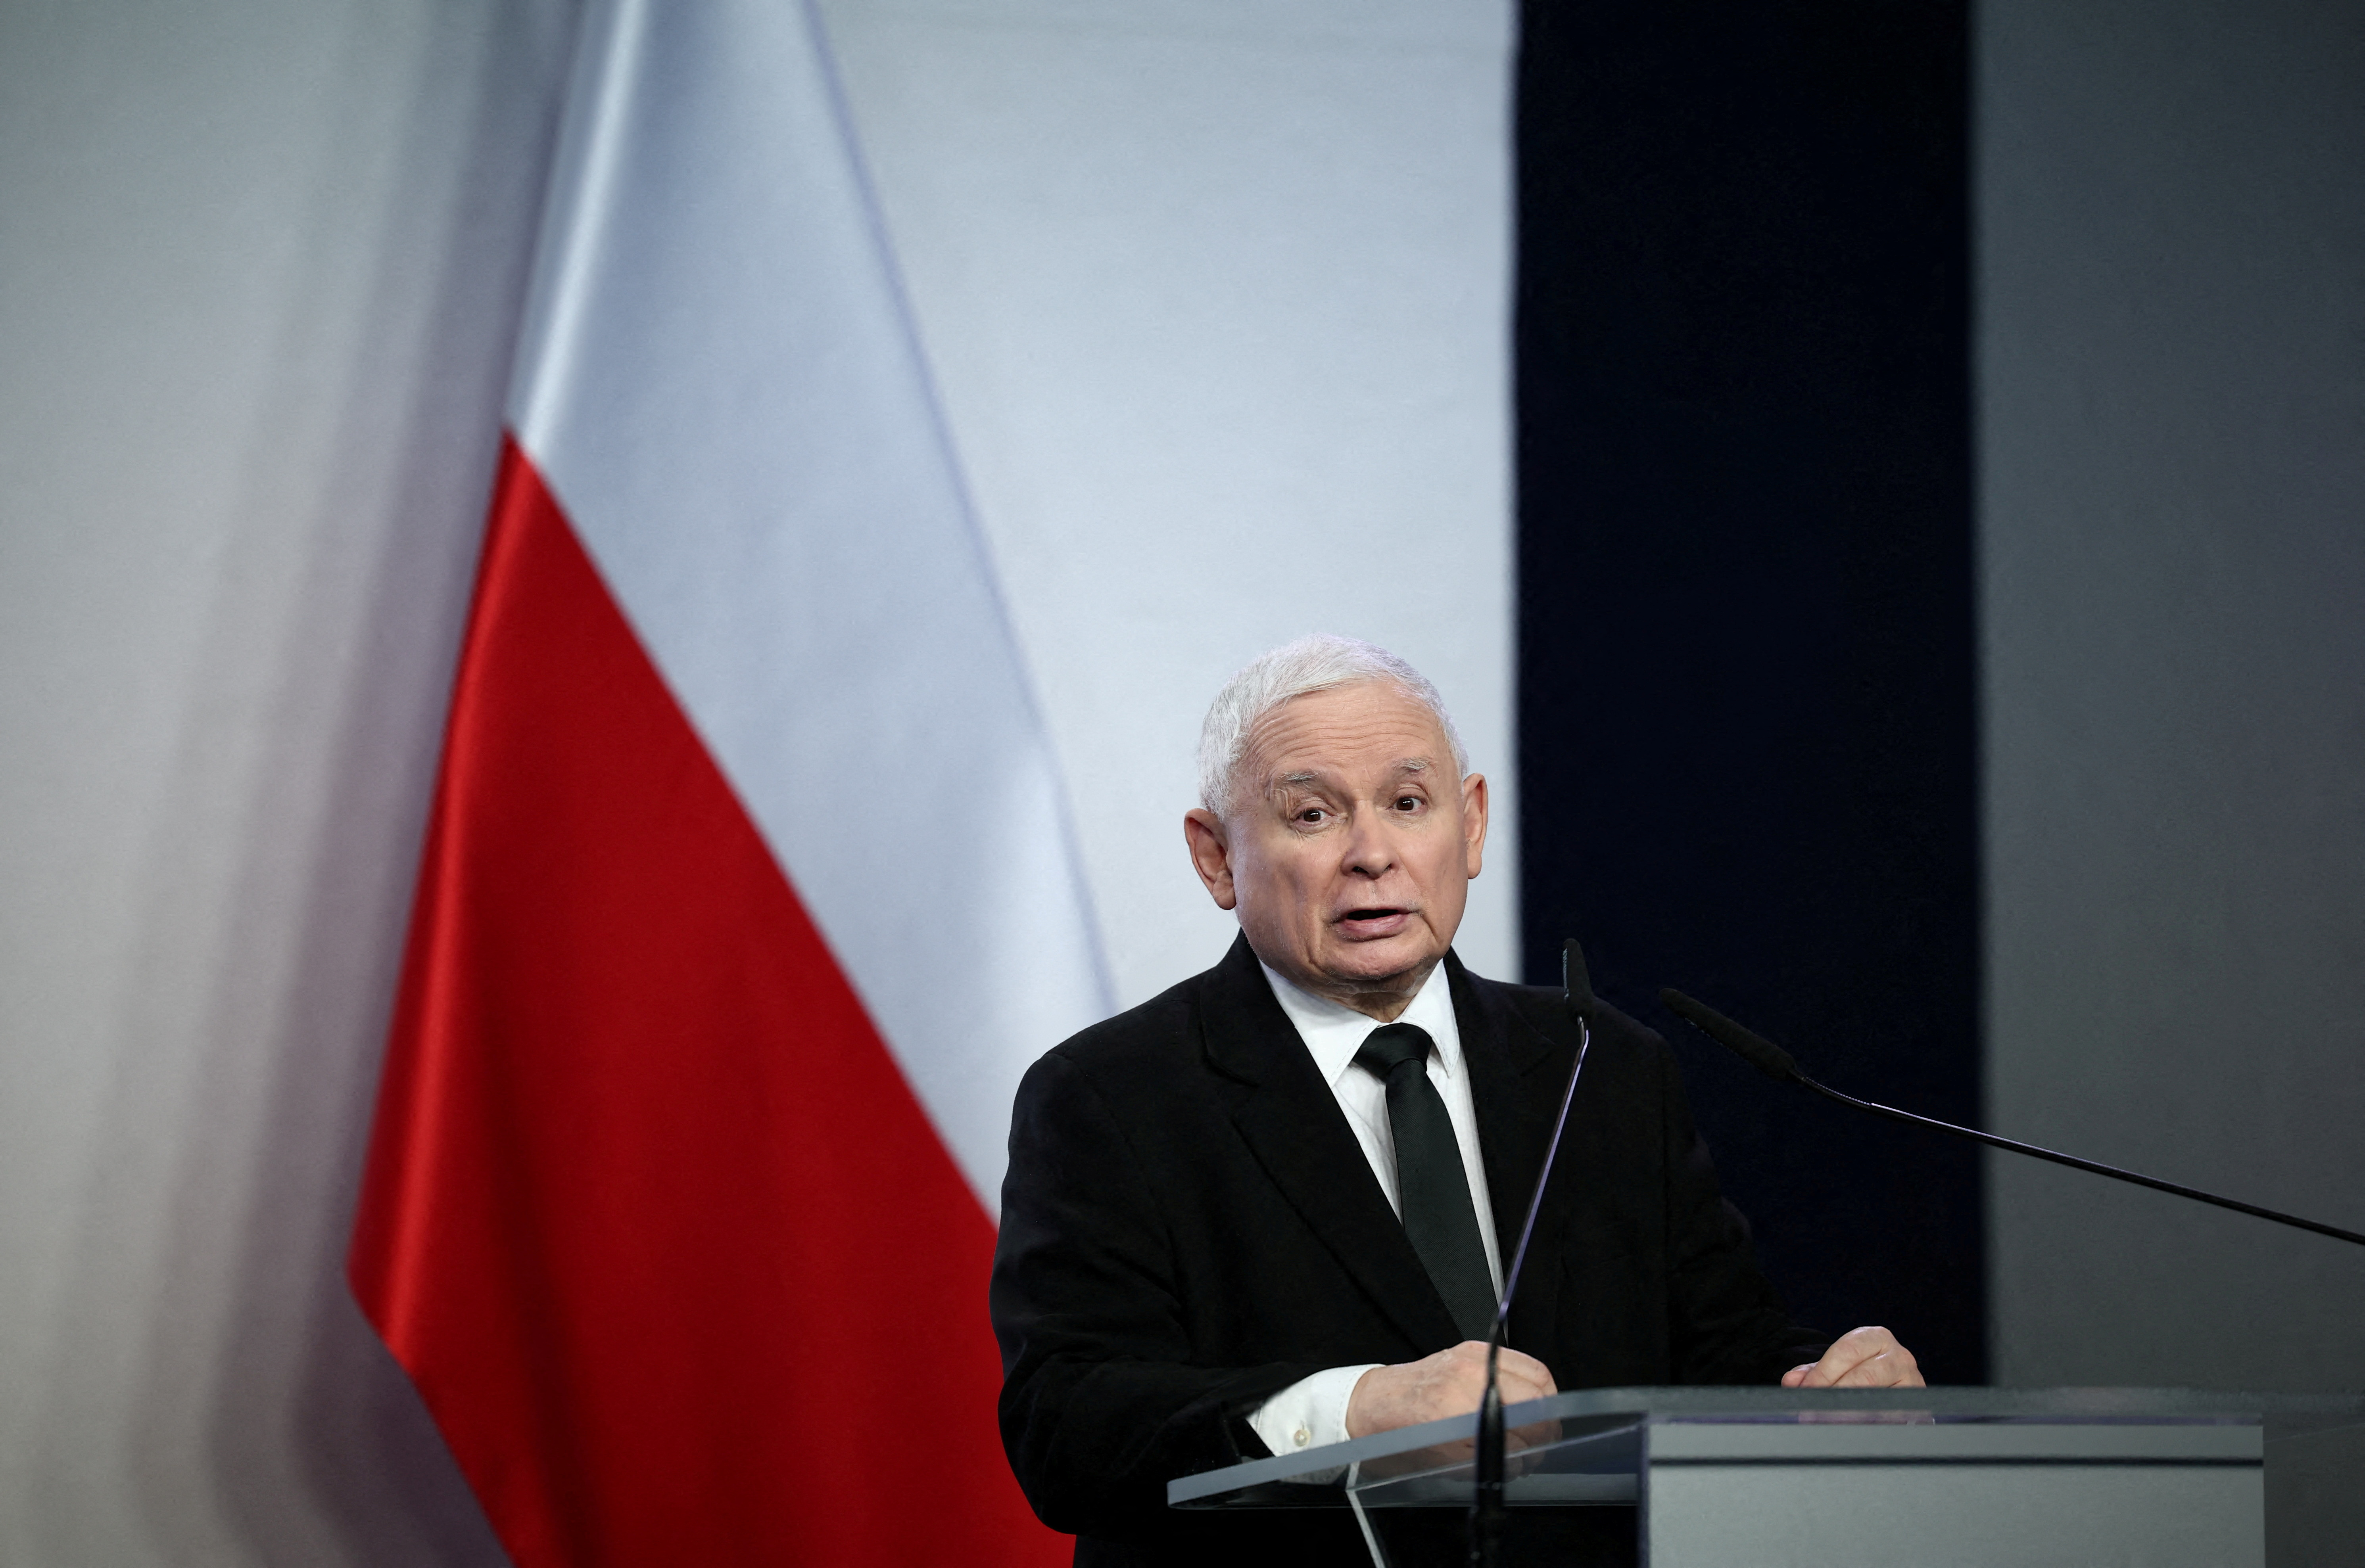 Poland's Law and Justice (PiS) party leader Jaroslaw Kaczynski holds a press conference at the party's headquarters in Warsaw